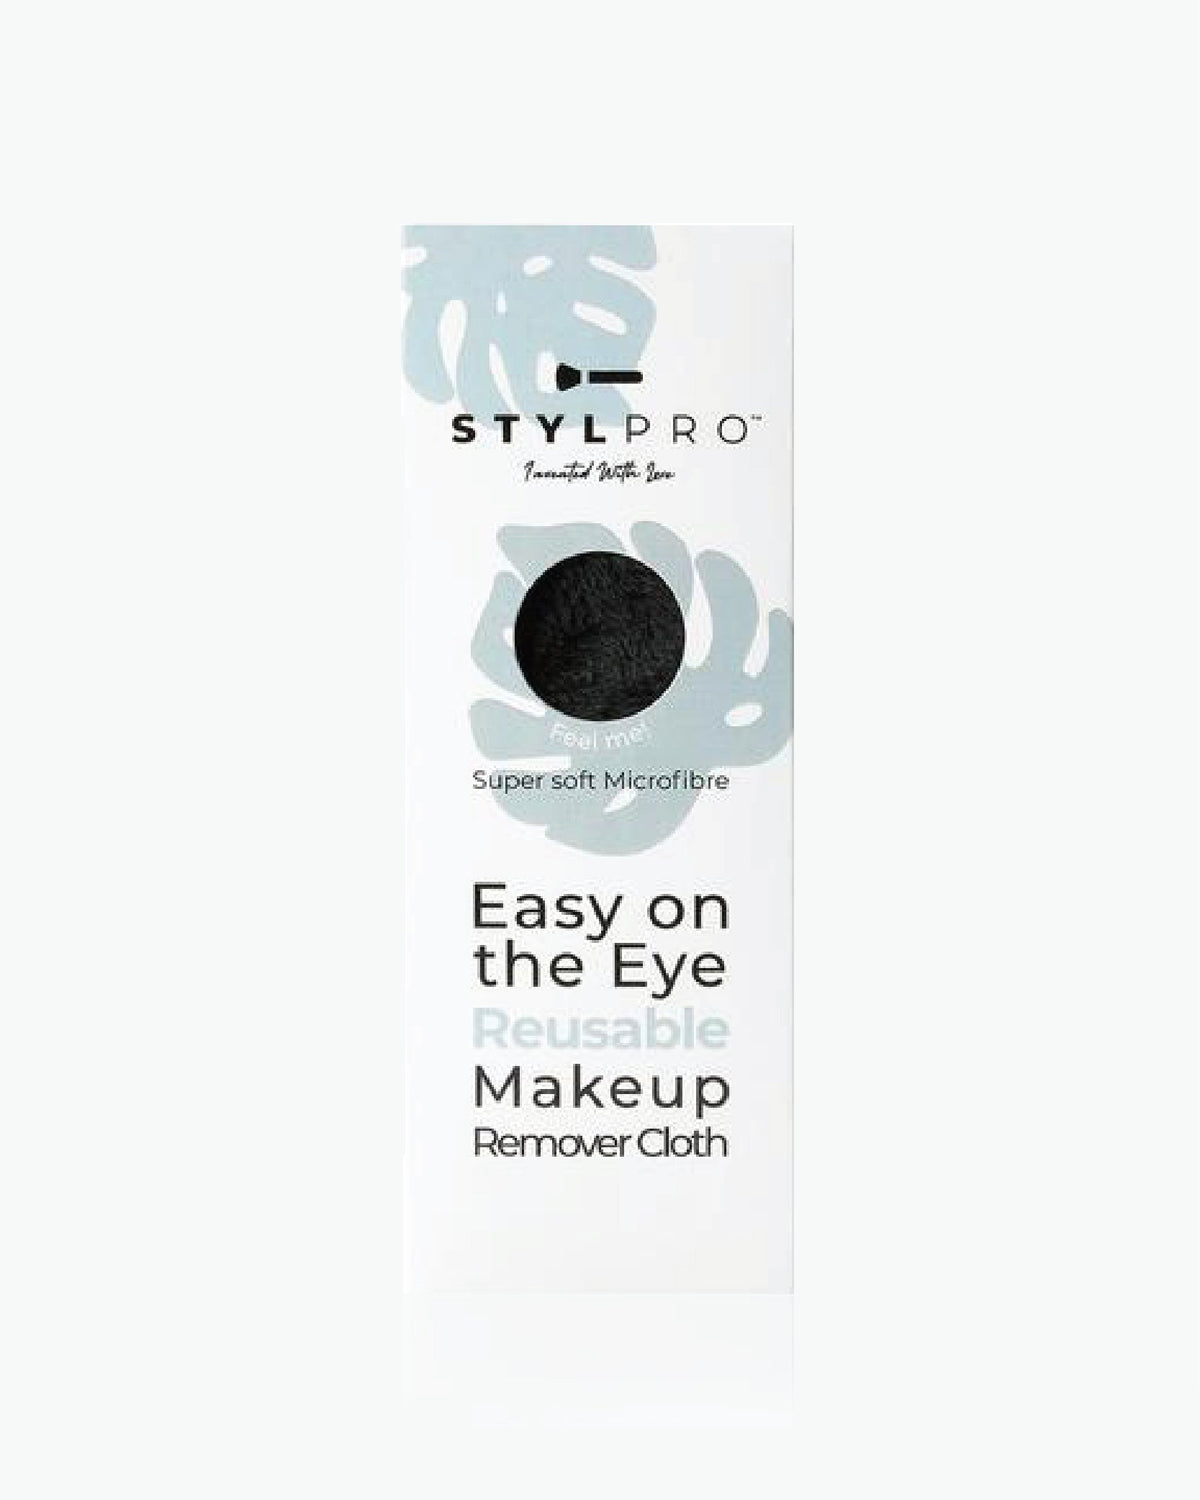 Stylpro Makeup Remover Cloth